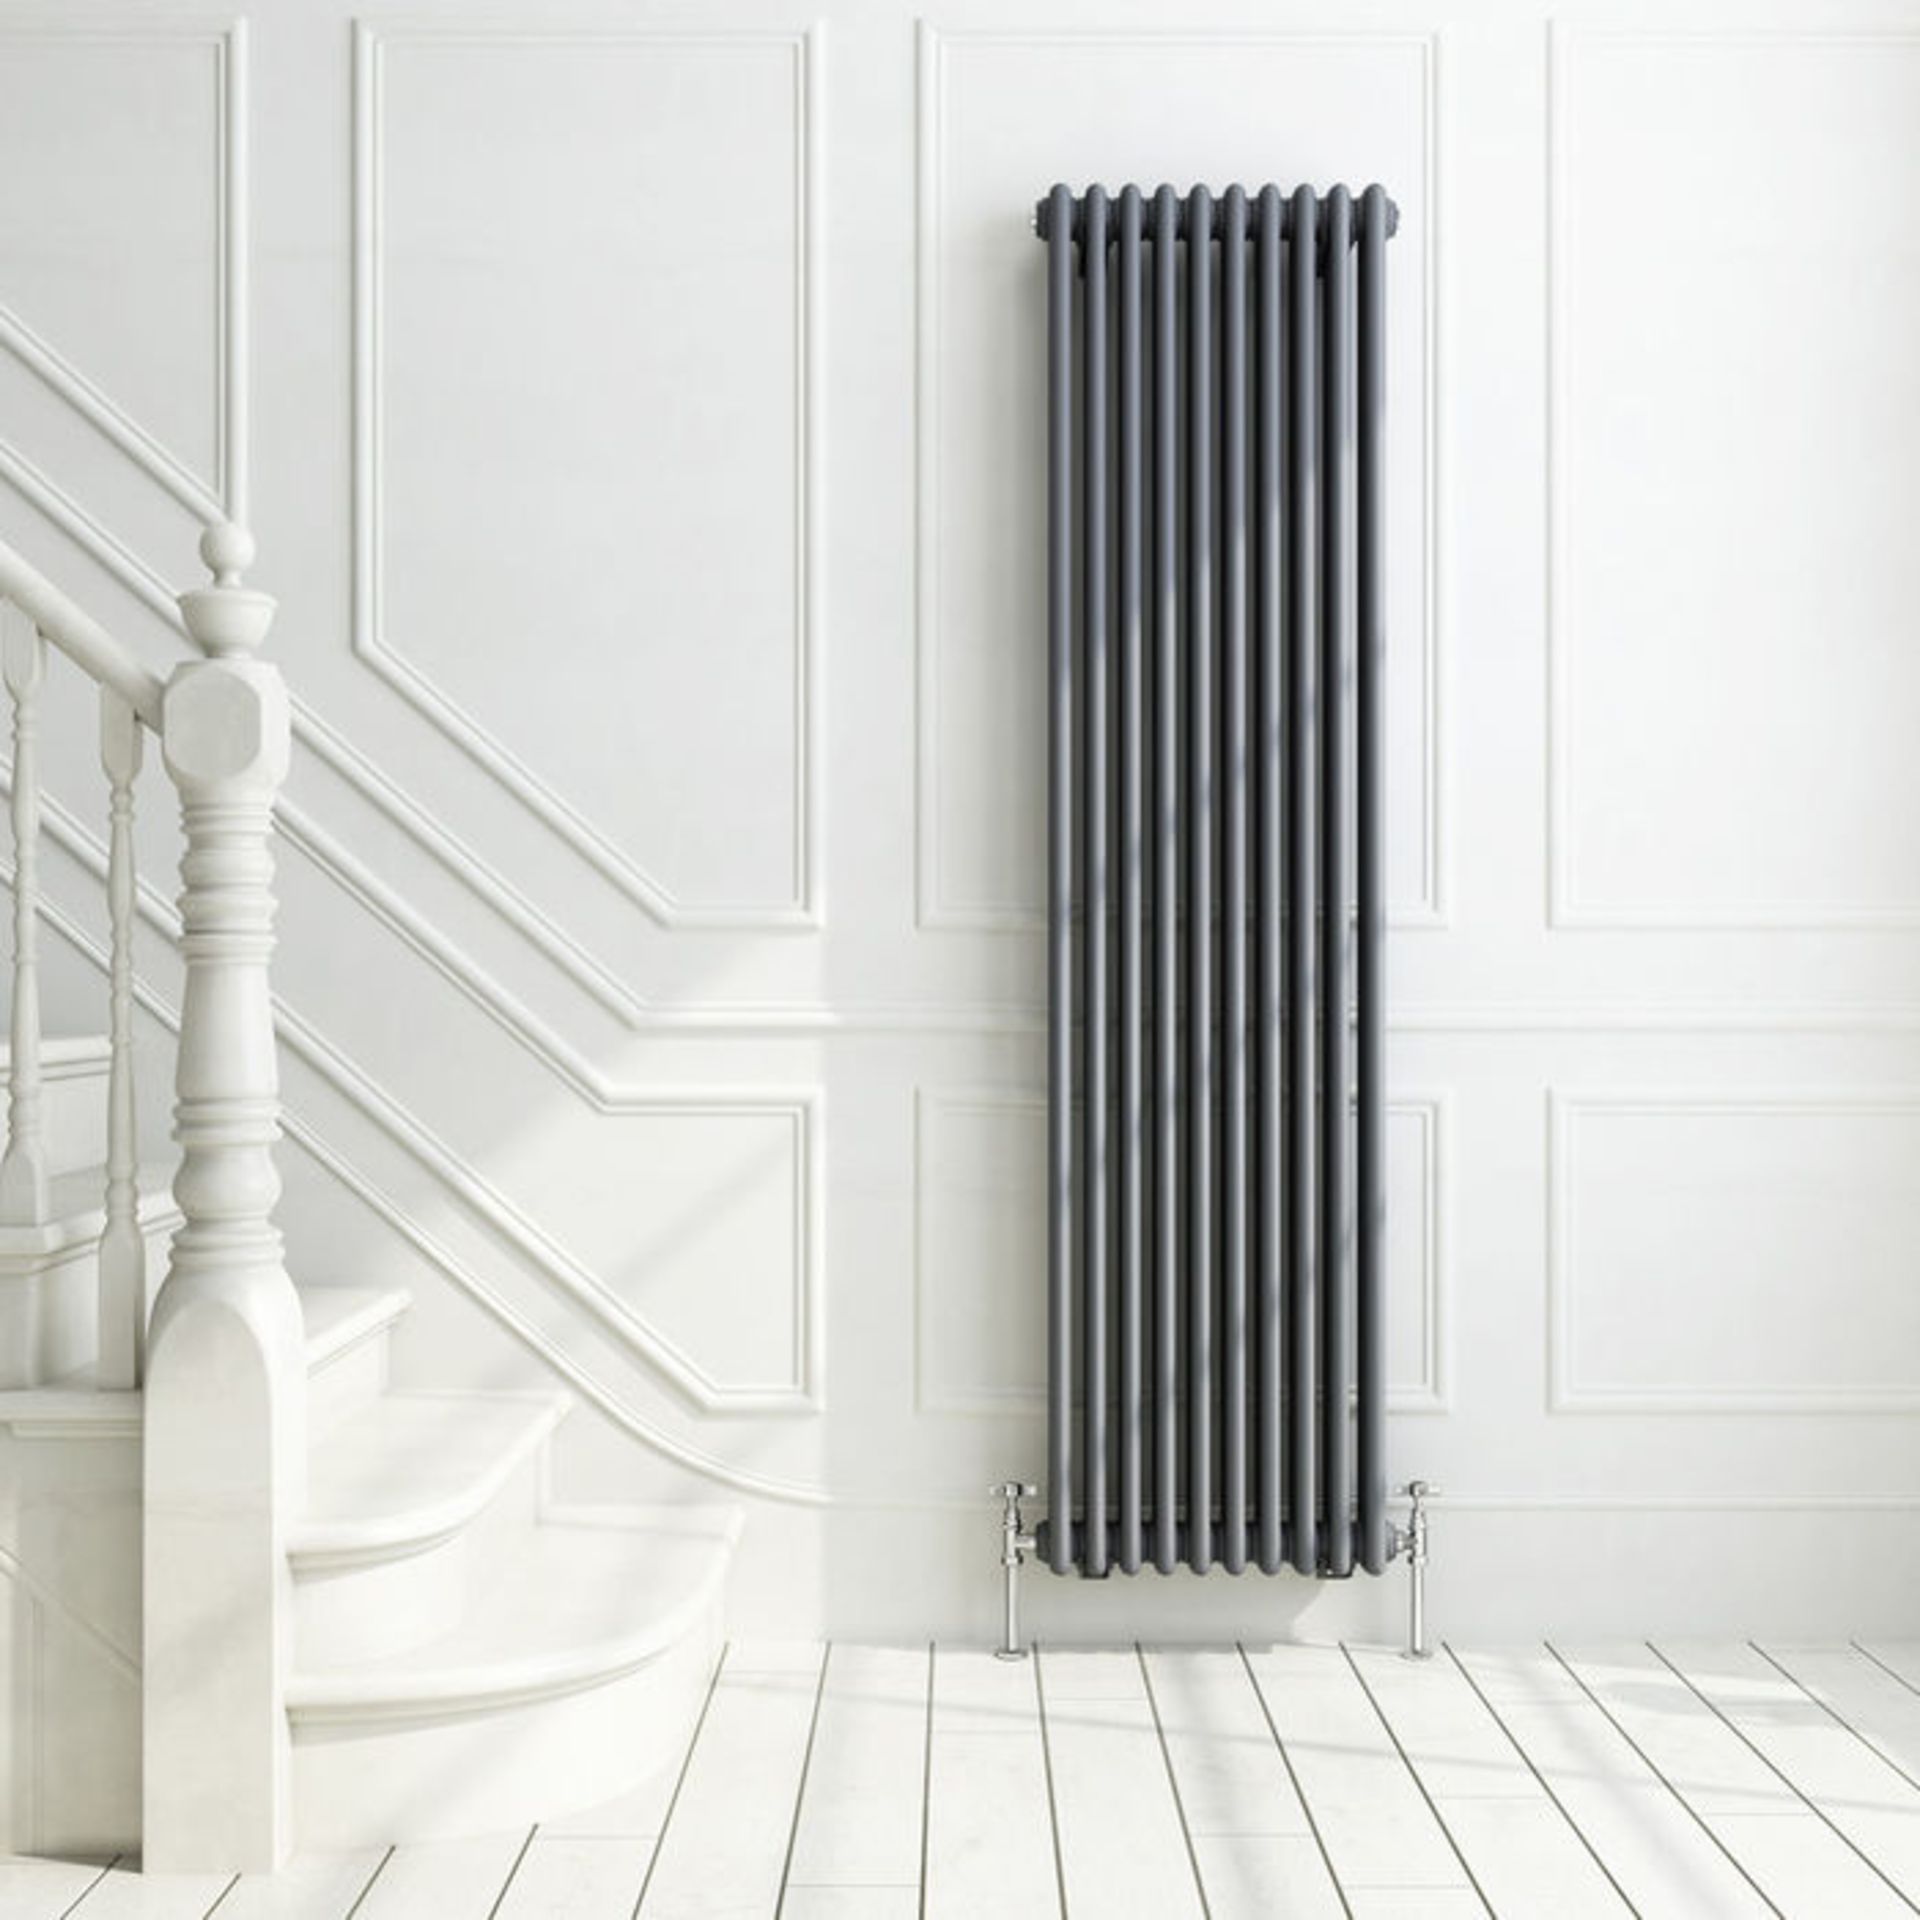 (OS117) 1800x468mm Anthracite Triple Panel Vertical Colosseum Traditional Radiator. RRP £534.99. - Image 2 of 3